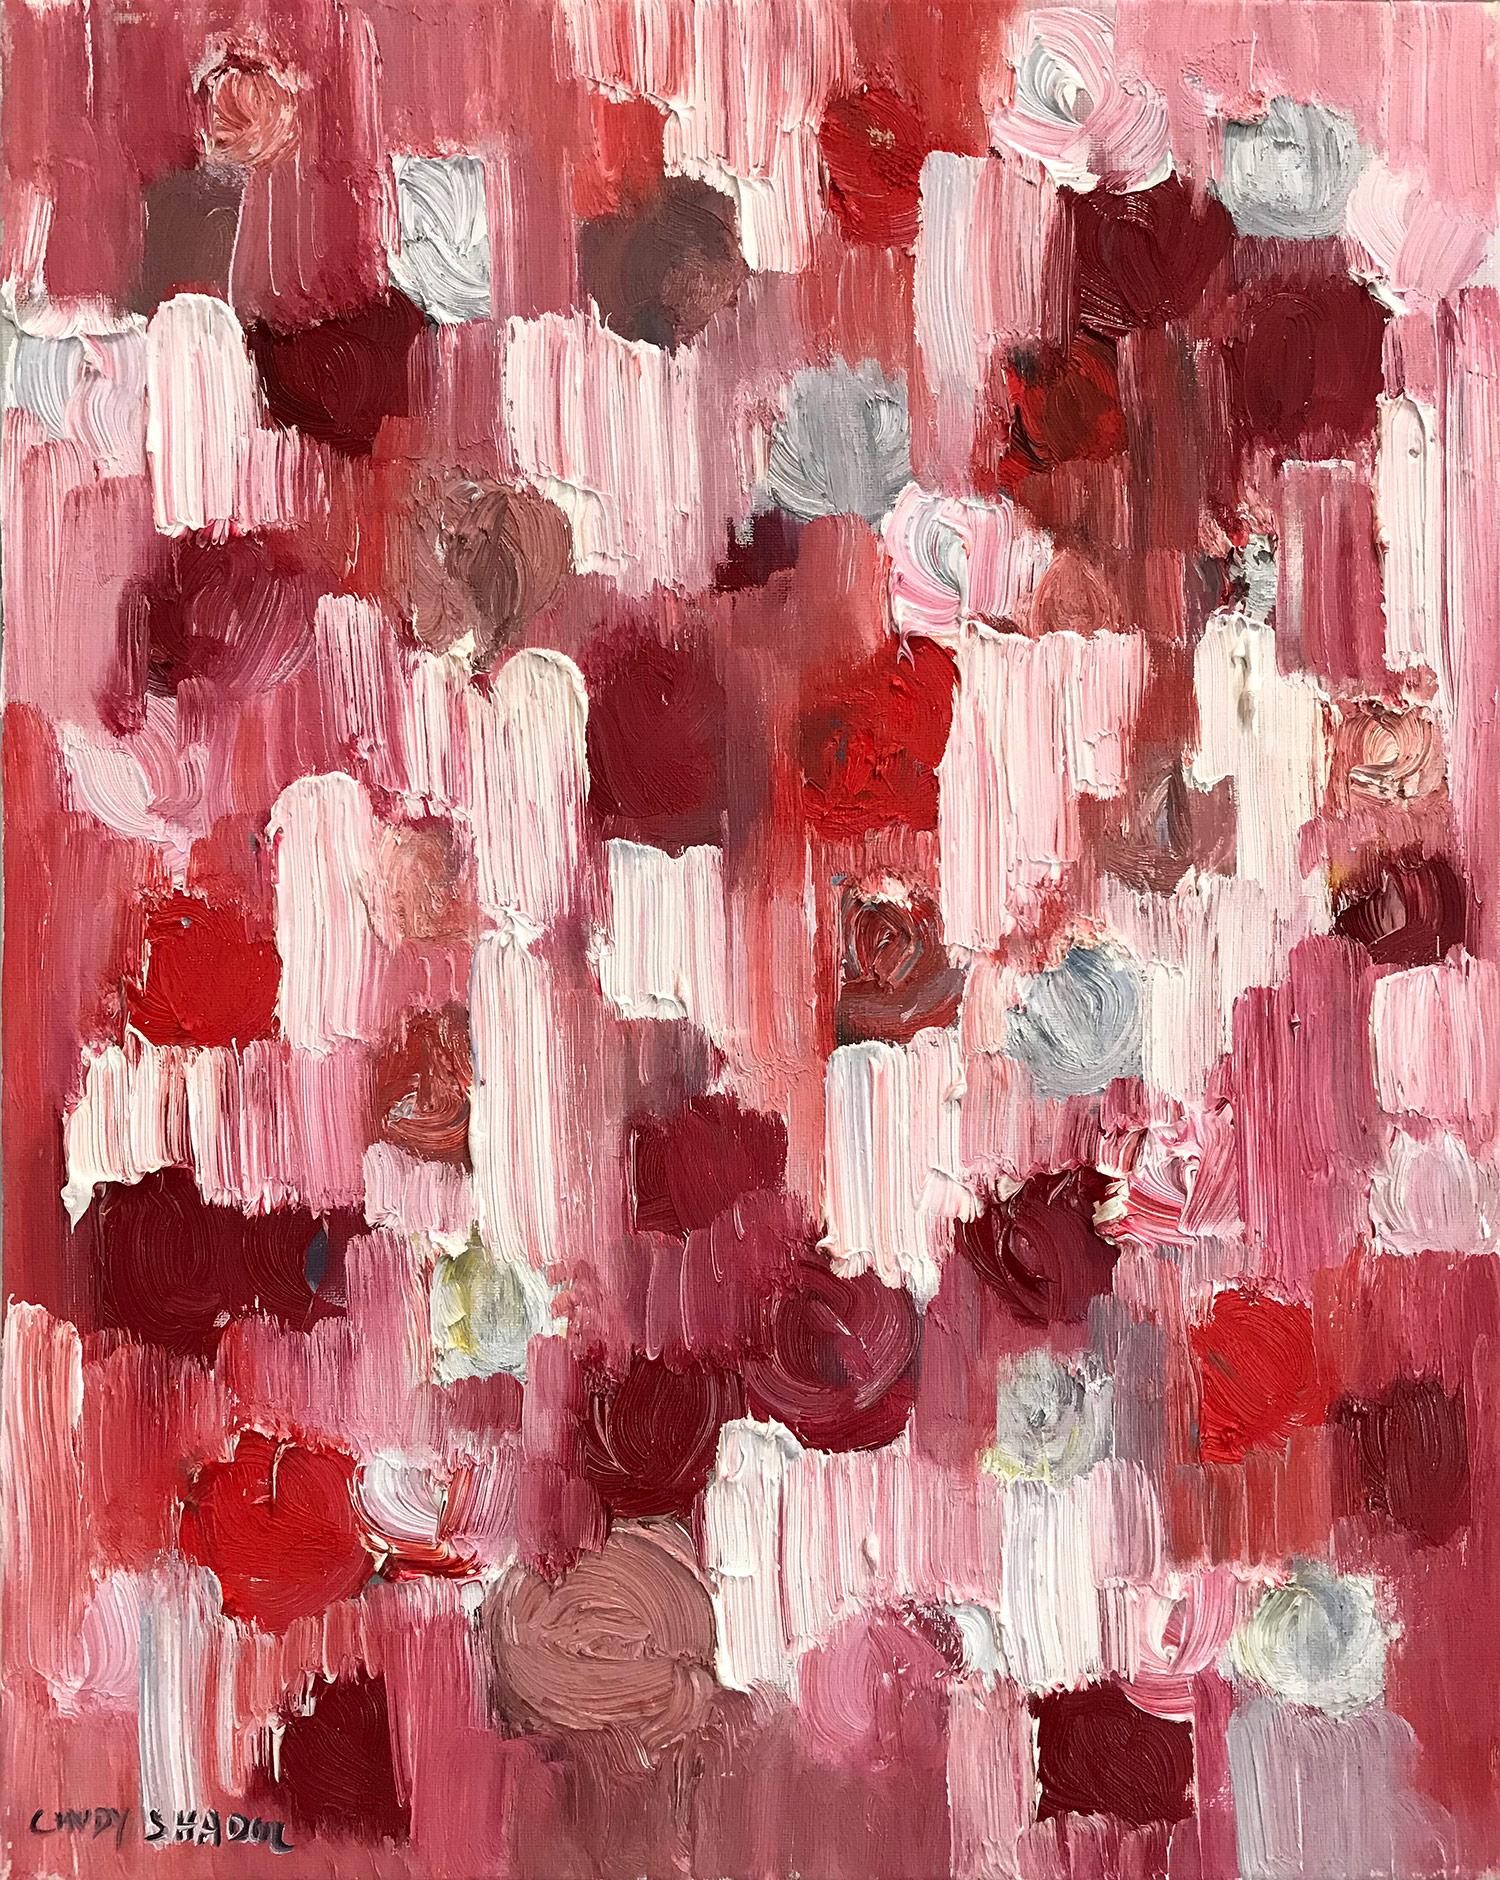 Dripping Dots, All in Love, Deep Red - Painting by Cindy Shaoul